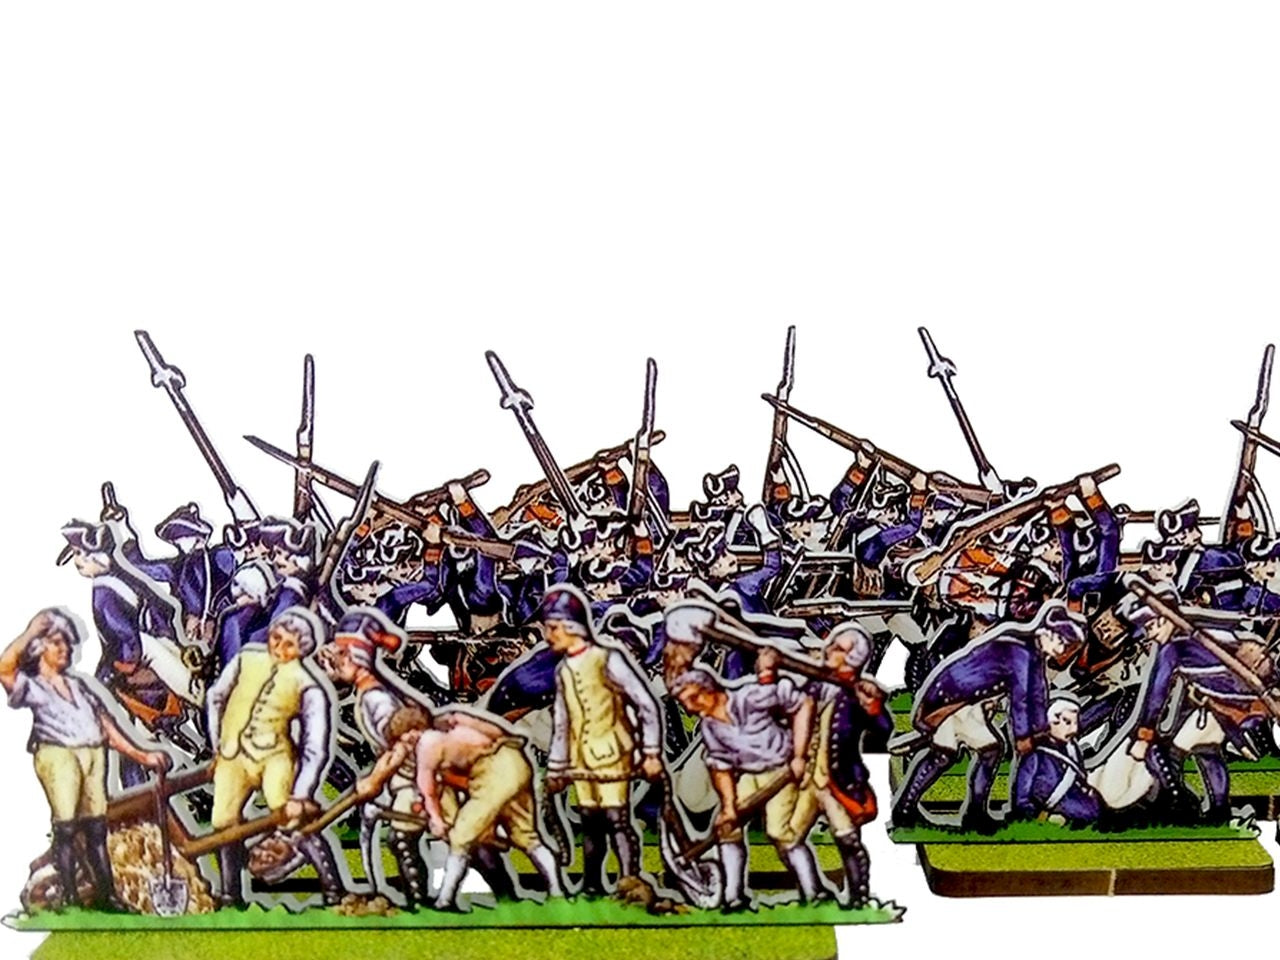 Prussian Artillery Men and Engineers, Prussian Infantry in Assault